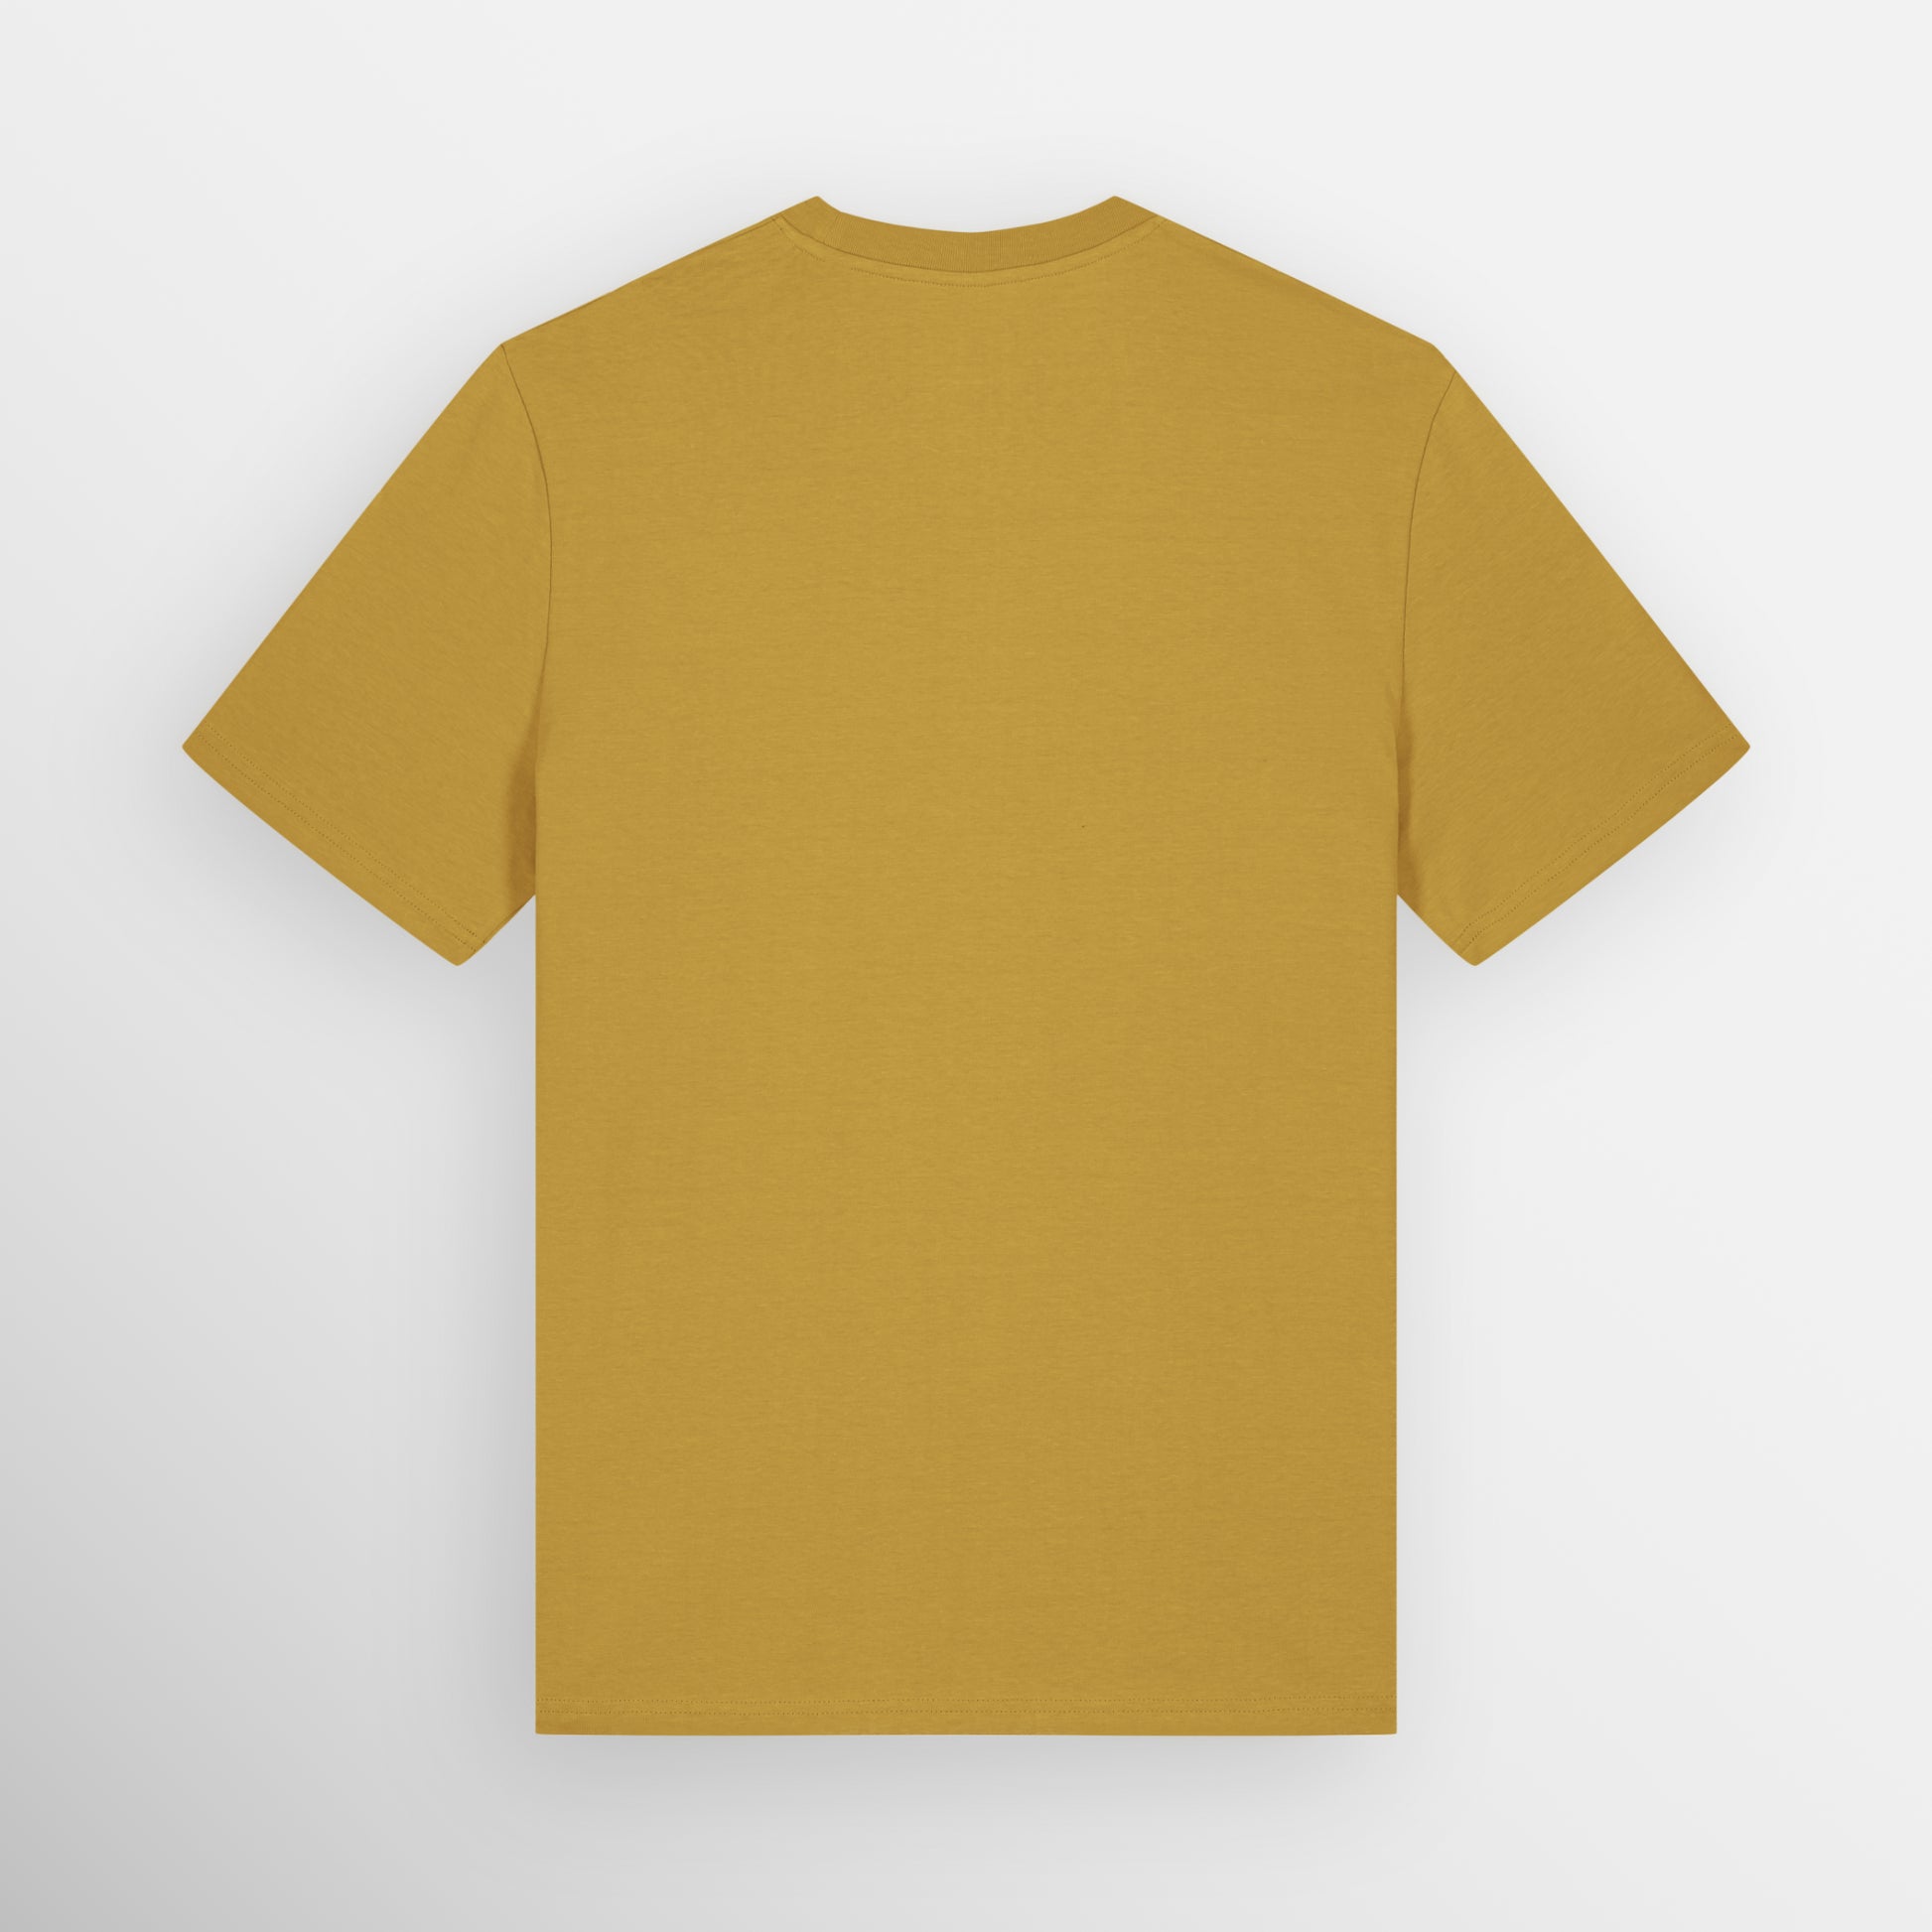 Image shows the plain back of the Ochre coloured regular fit t-shirt.